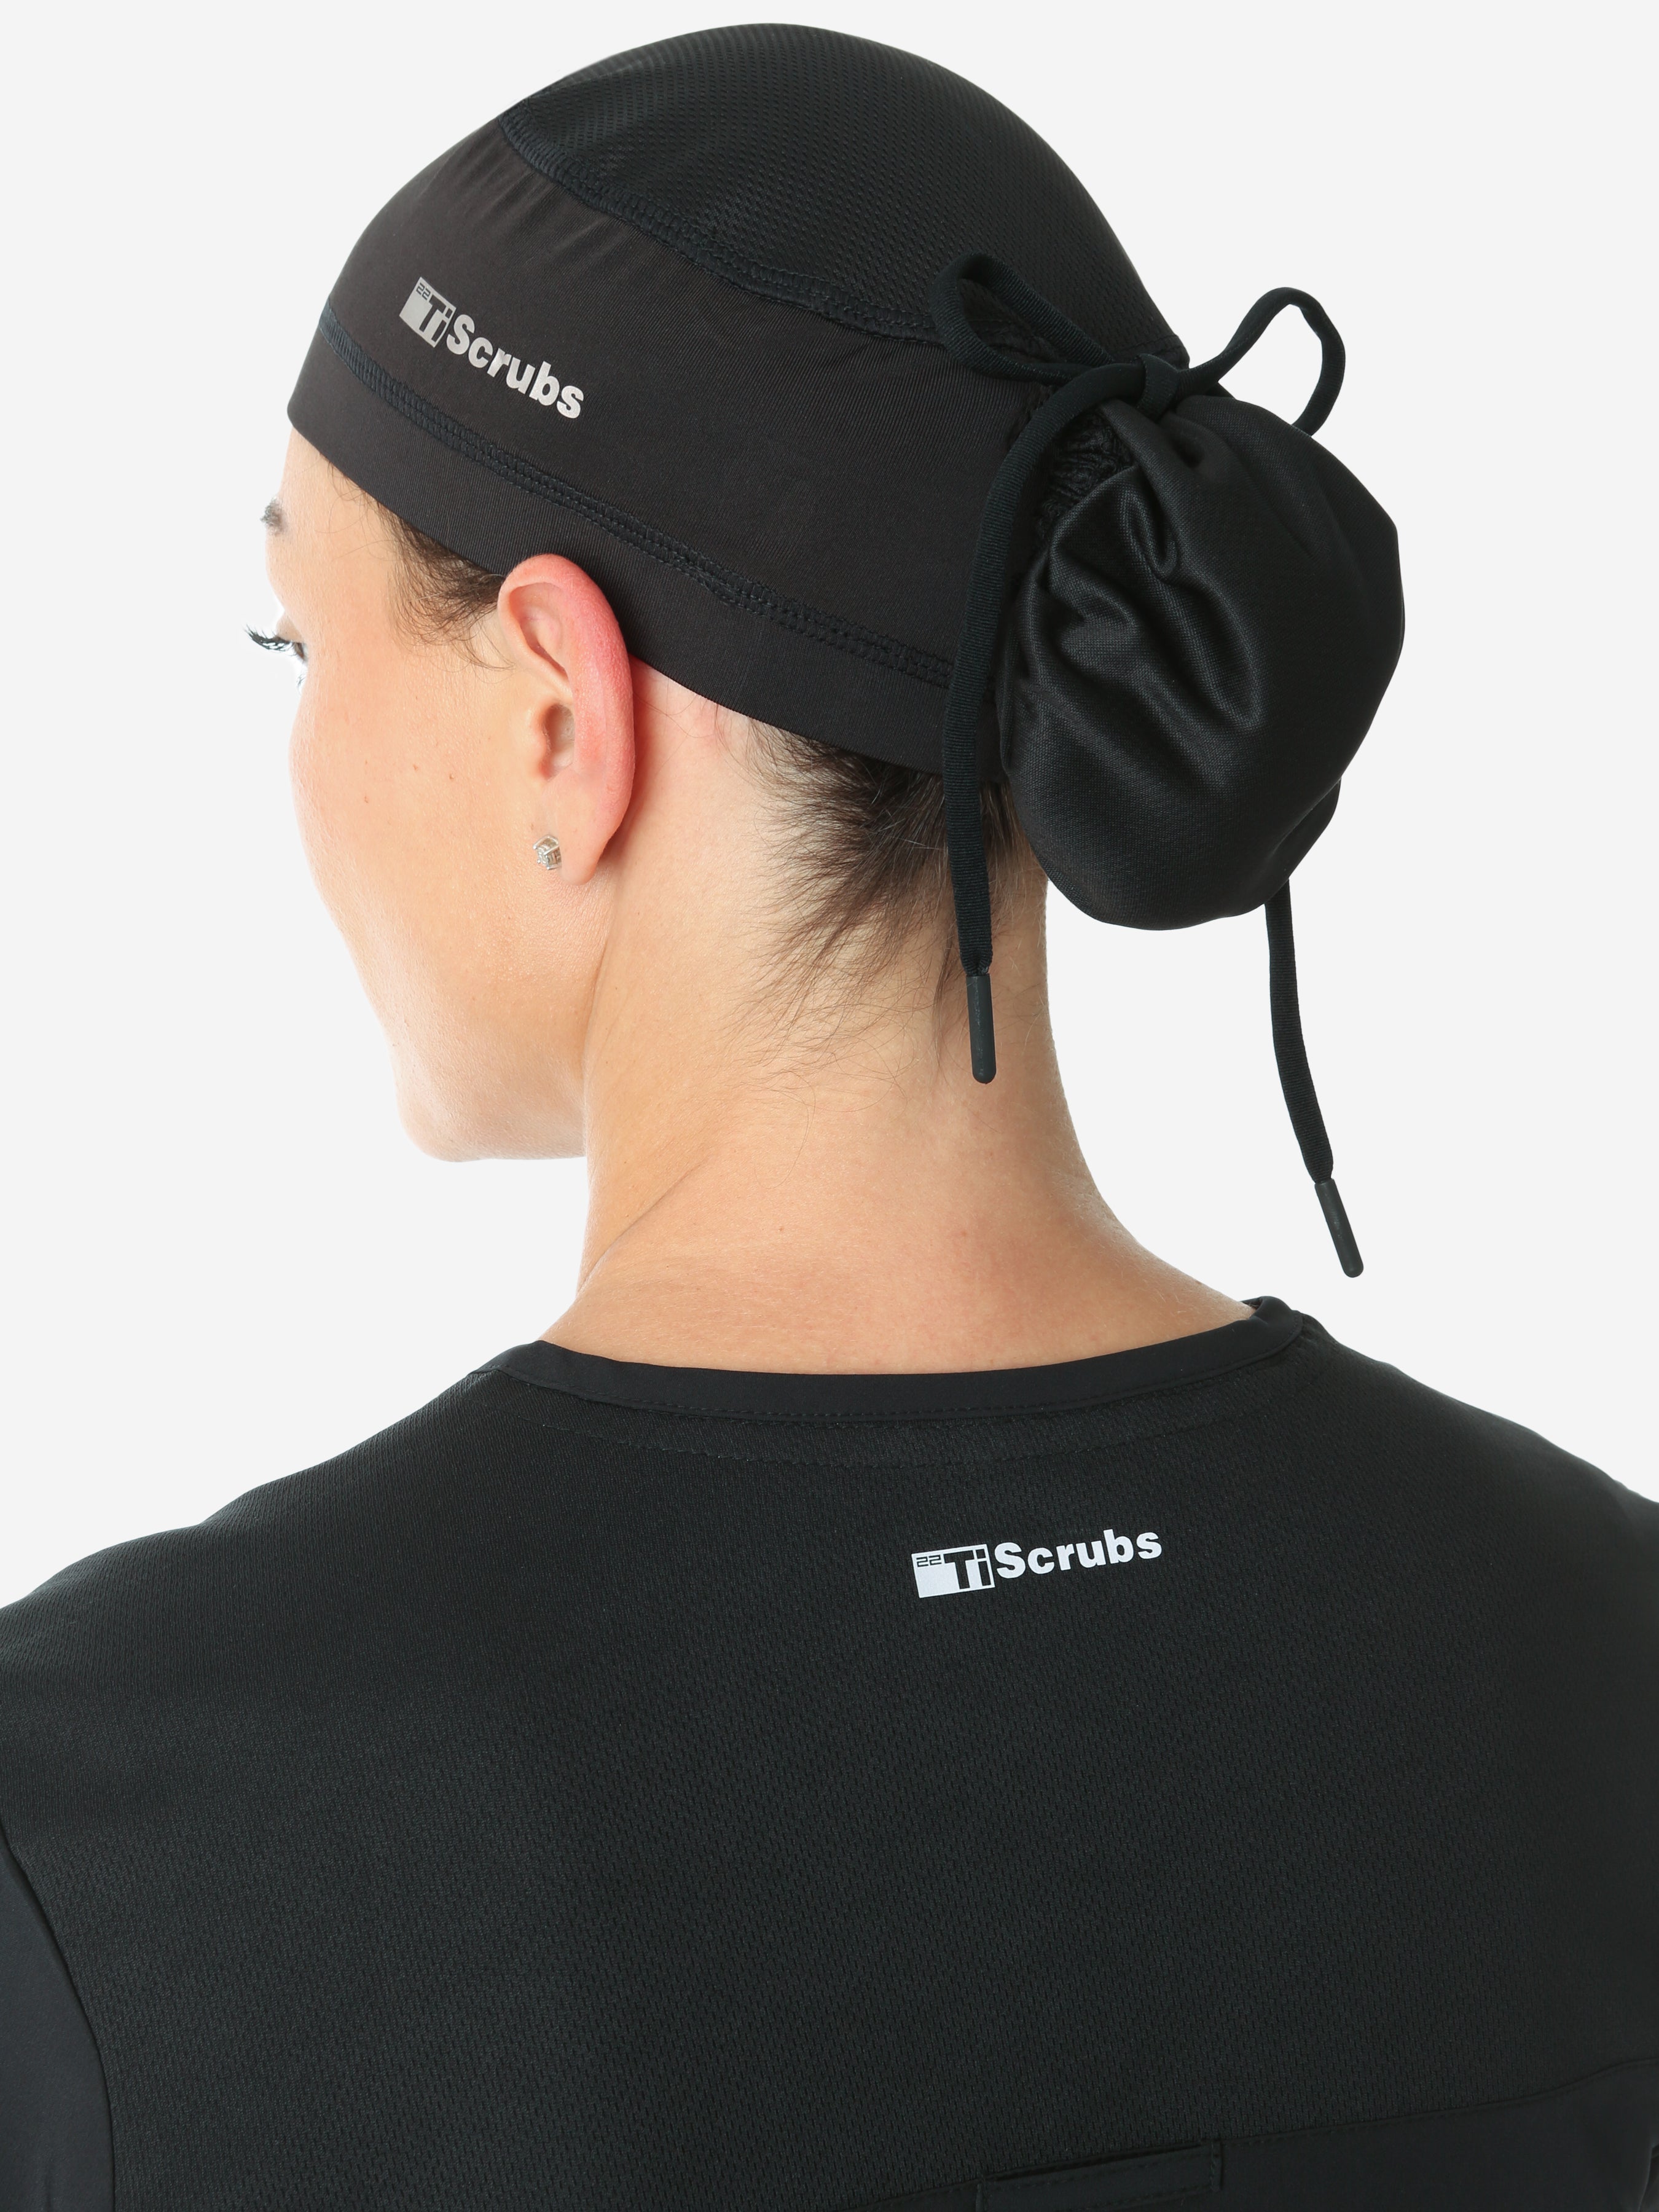 TiScrubs Women's Scrub Cap Real Back and Side View